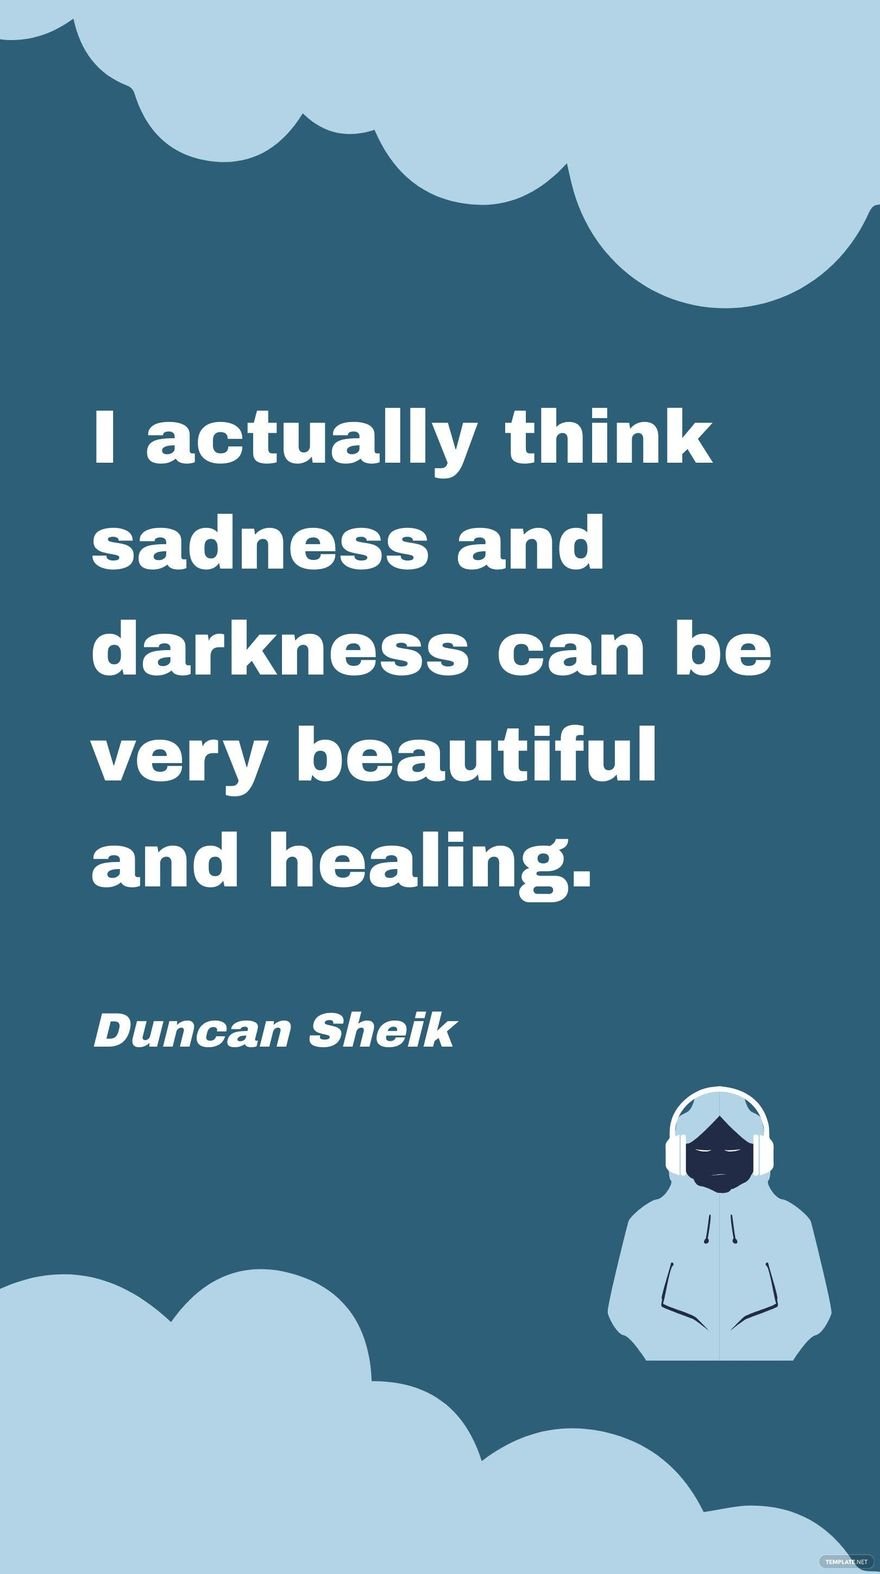 Duncan Sheik - I actually think sadness and darkness can be very beautiful and healing.